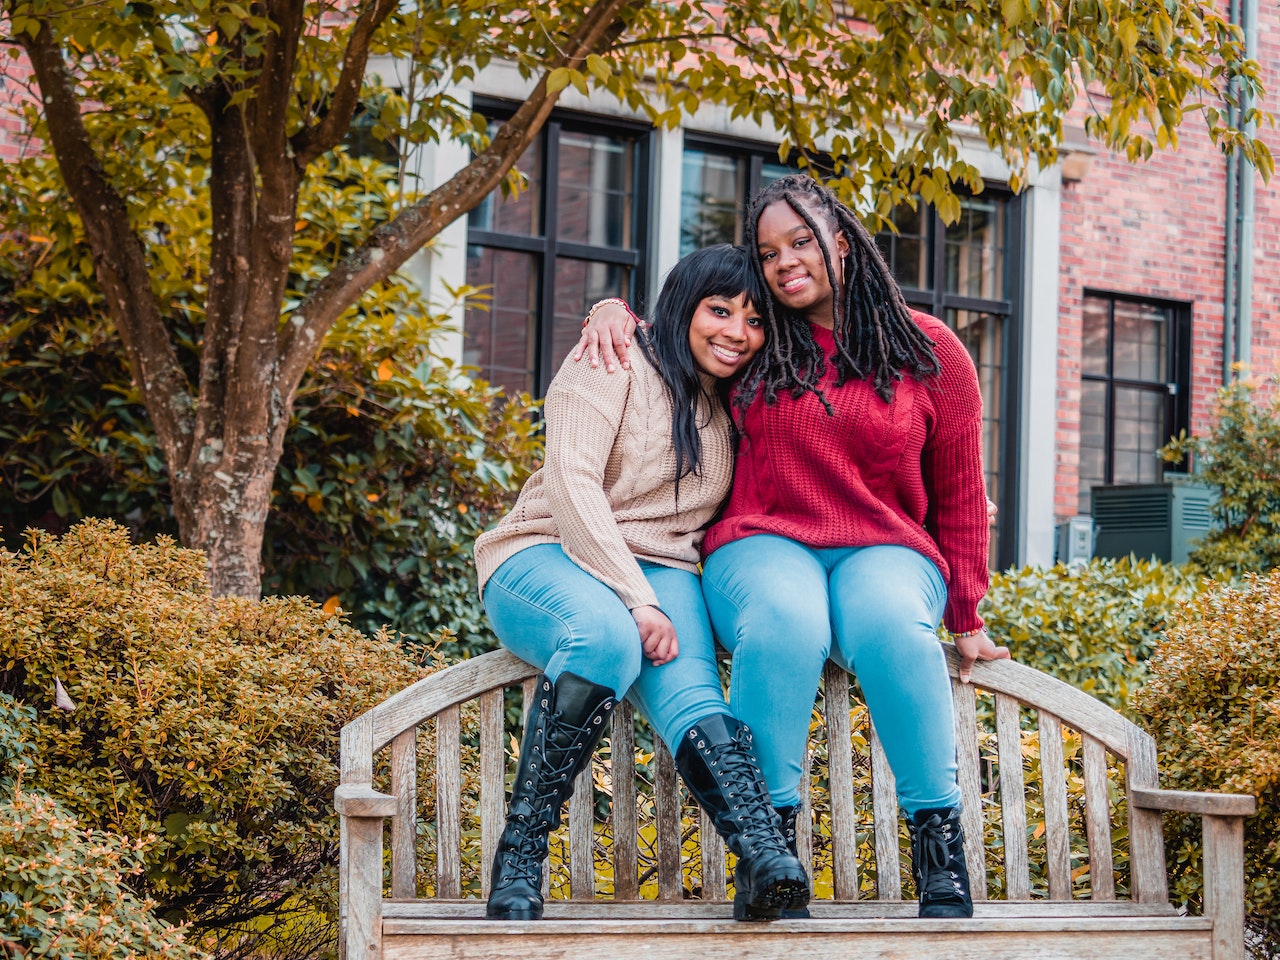 Send one these ride or die quotes to someone that has your back and you have theirs. Pictured: Two black women sitting on a bench ready to take on the world together.